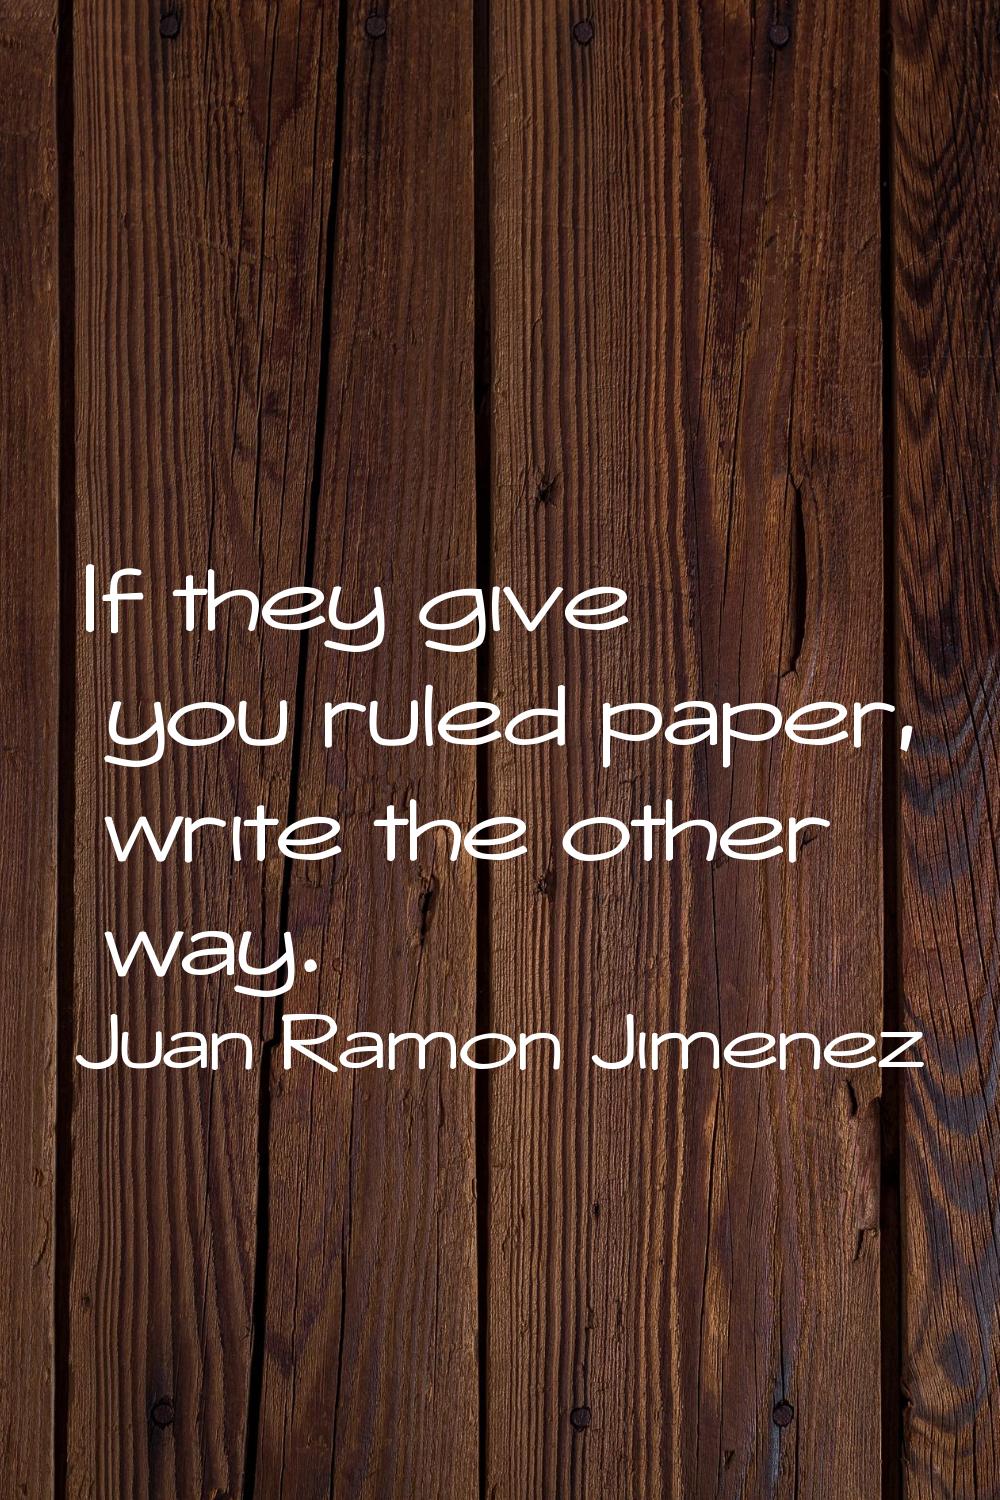 If they give you ruled paper, write the other way.